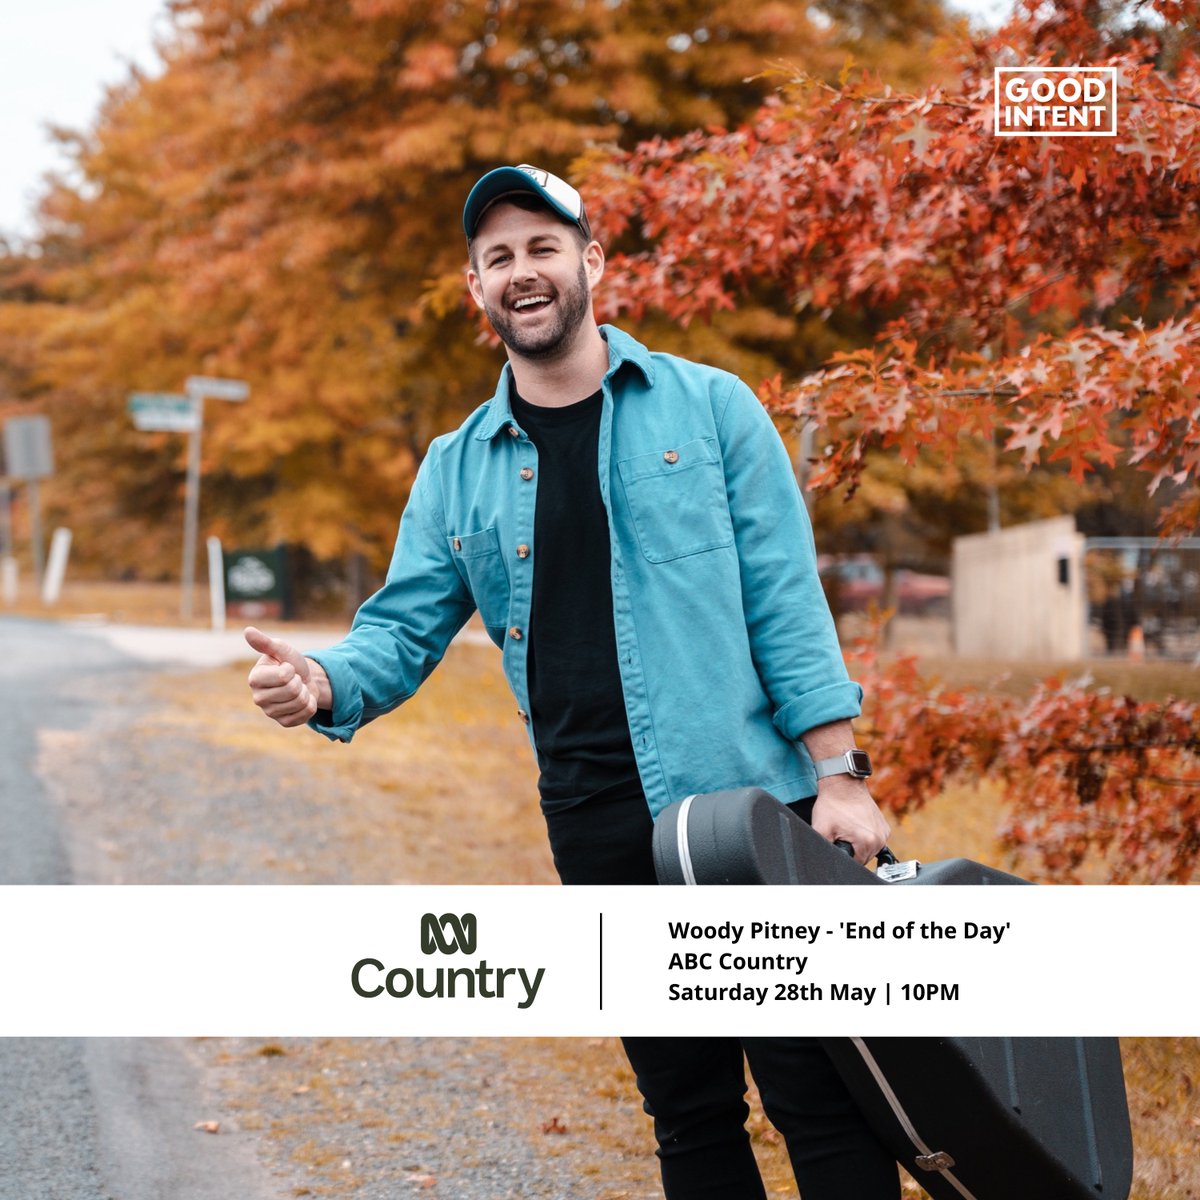 Tune in to ABC Country this Saturday to hear @WoodyPitney's latest track, ‘End of the Day’ 💛

Thank you @ABCCountry 🫶